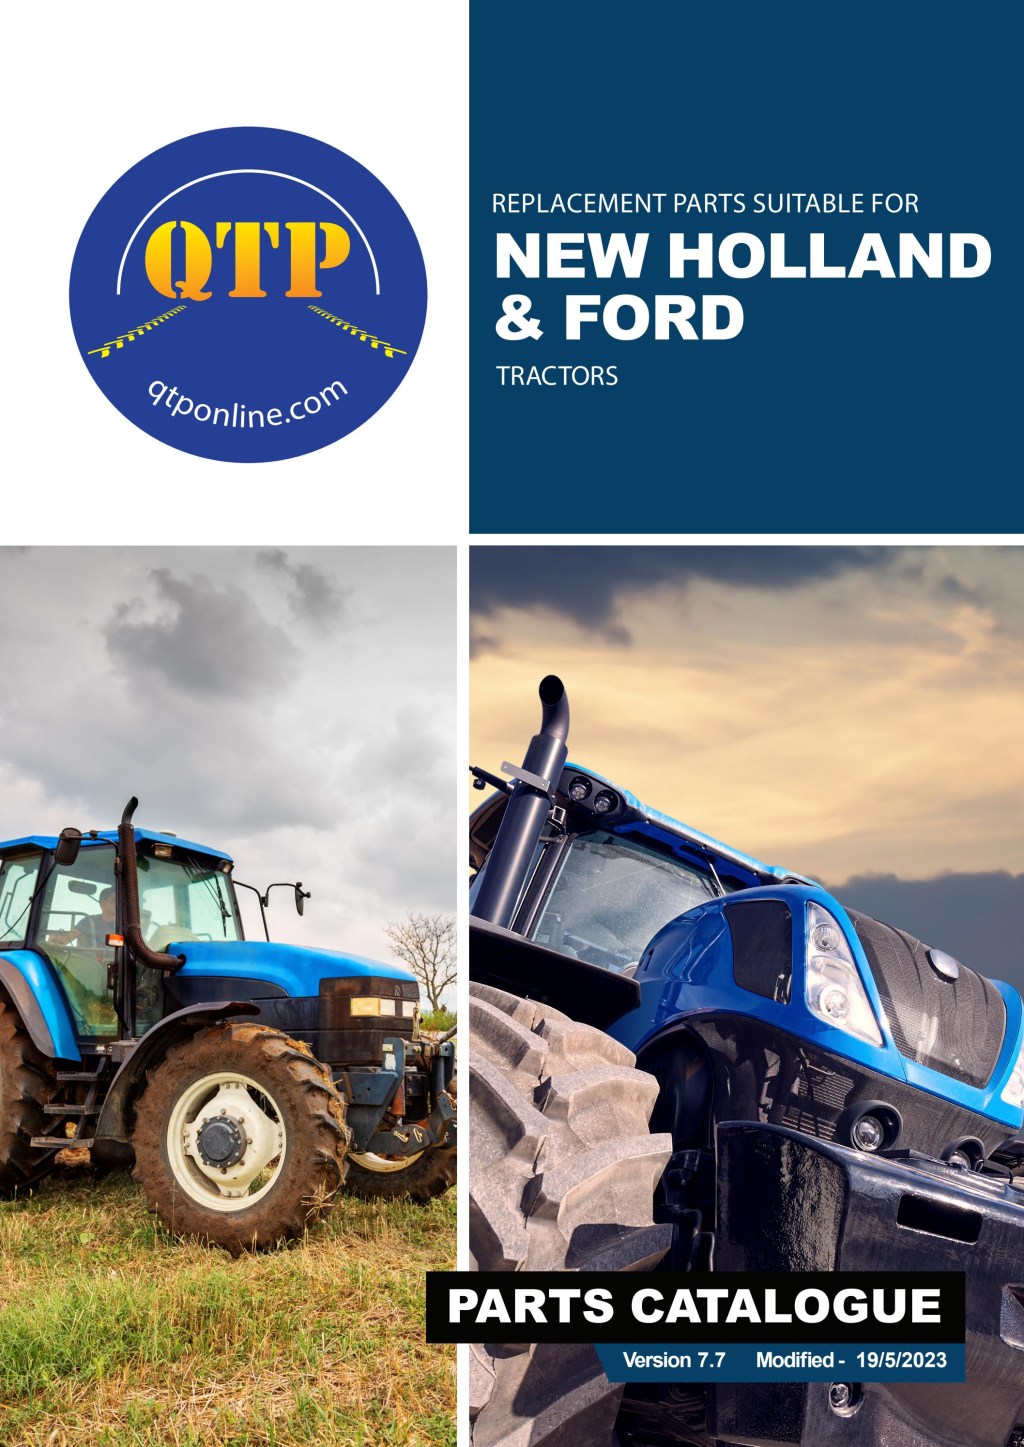 Picture of: Ford New Holland Parts Catalogue! by Quality Tractor Parts – Issuu